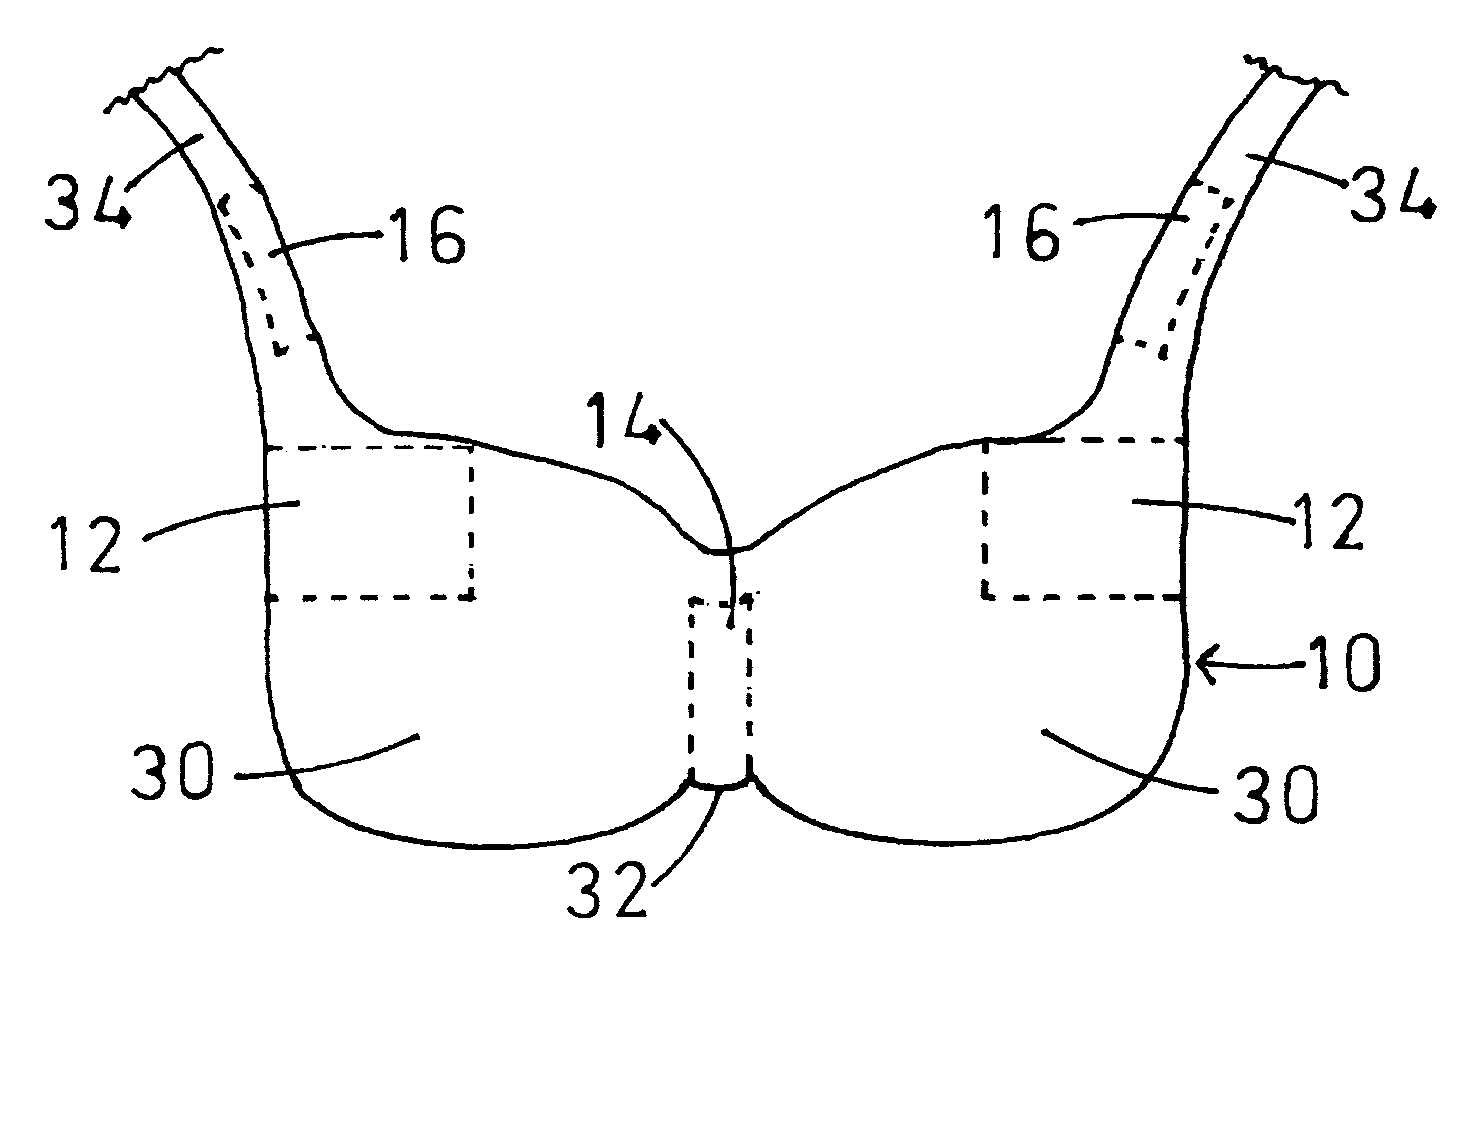 Bra including concealed carrying compartments and carrying system